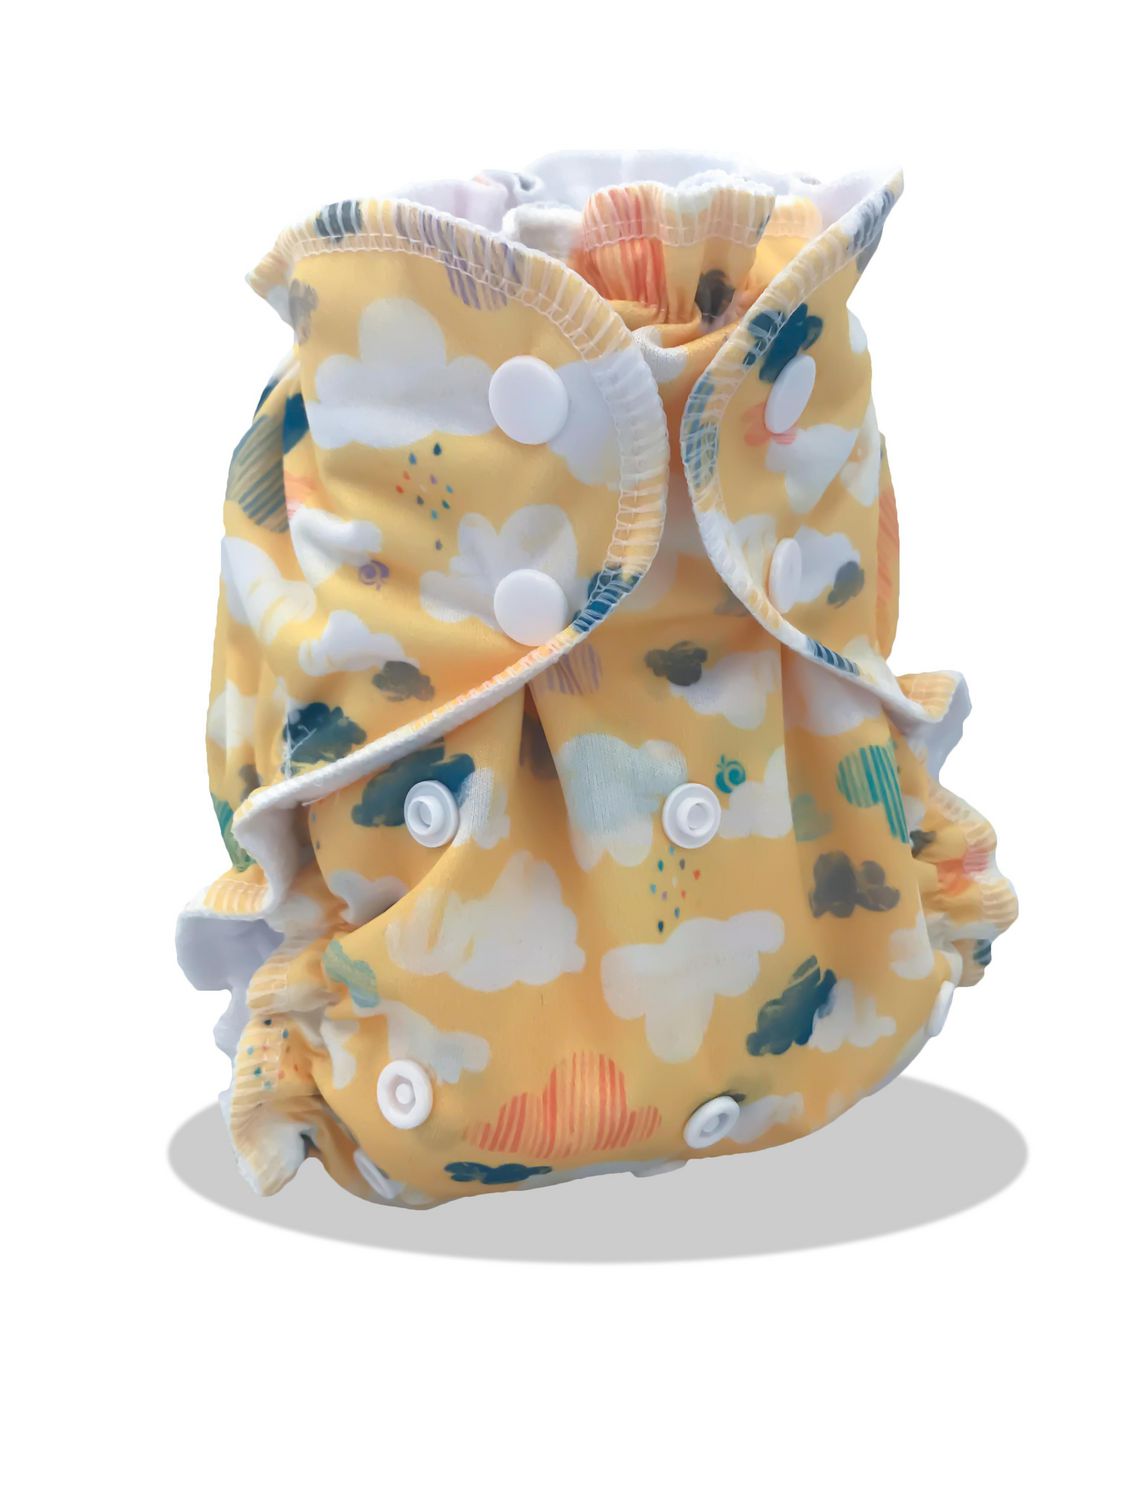 canadian made cloth diapers